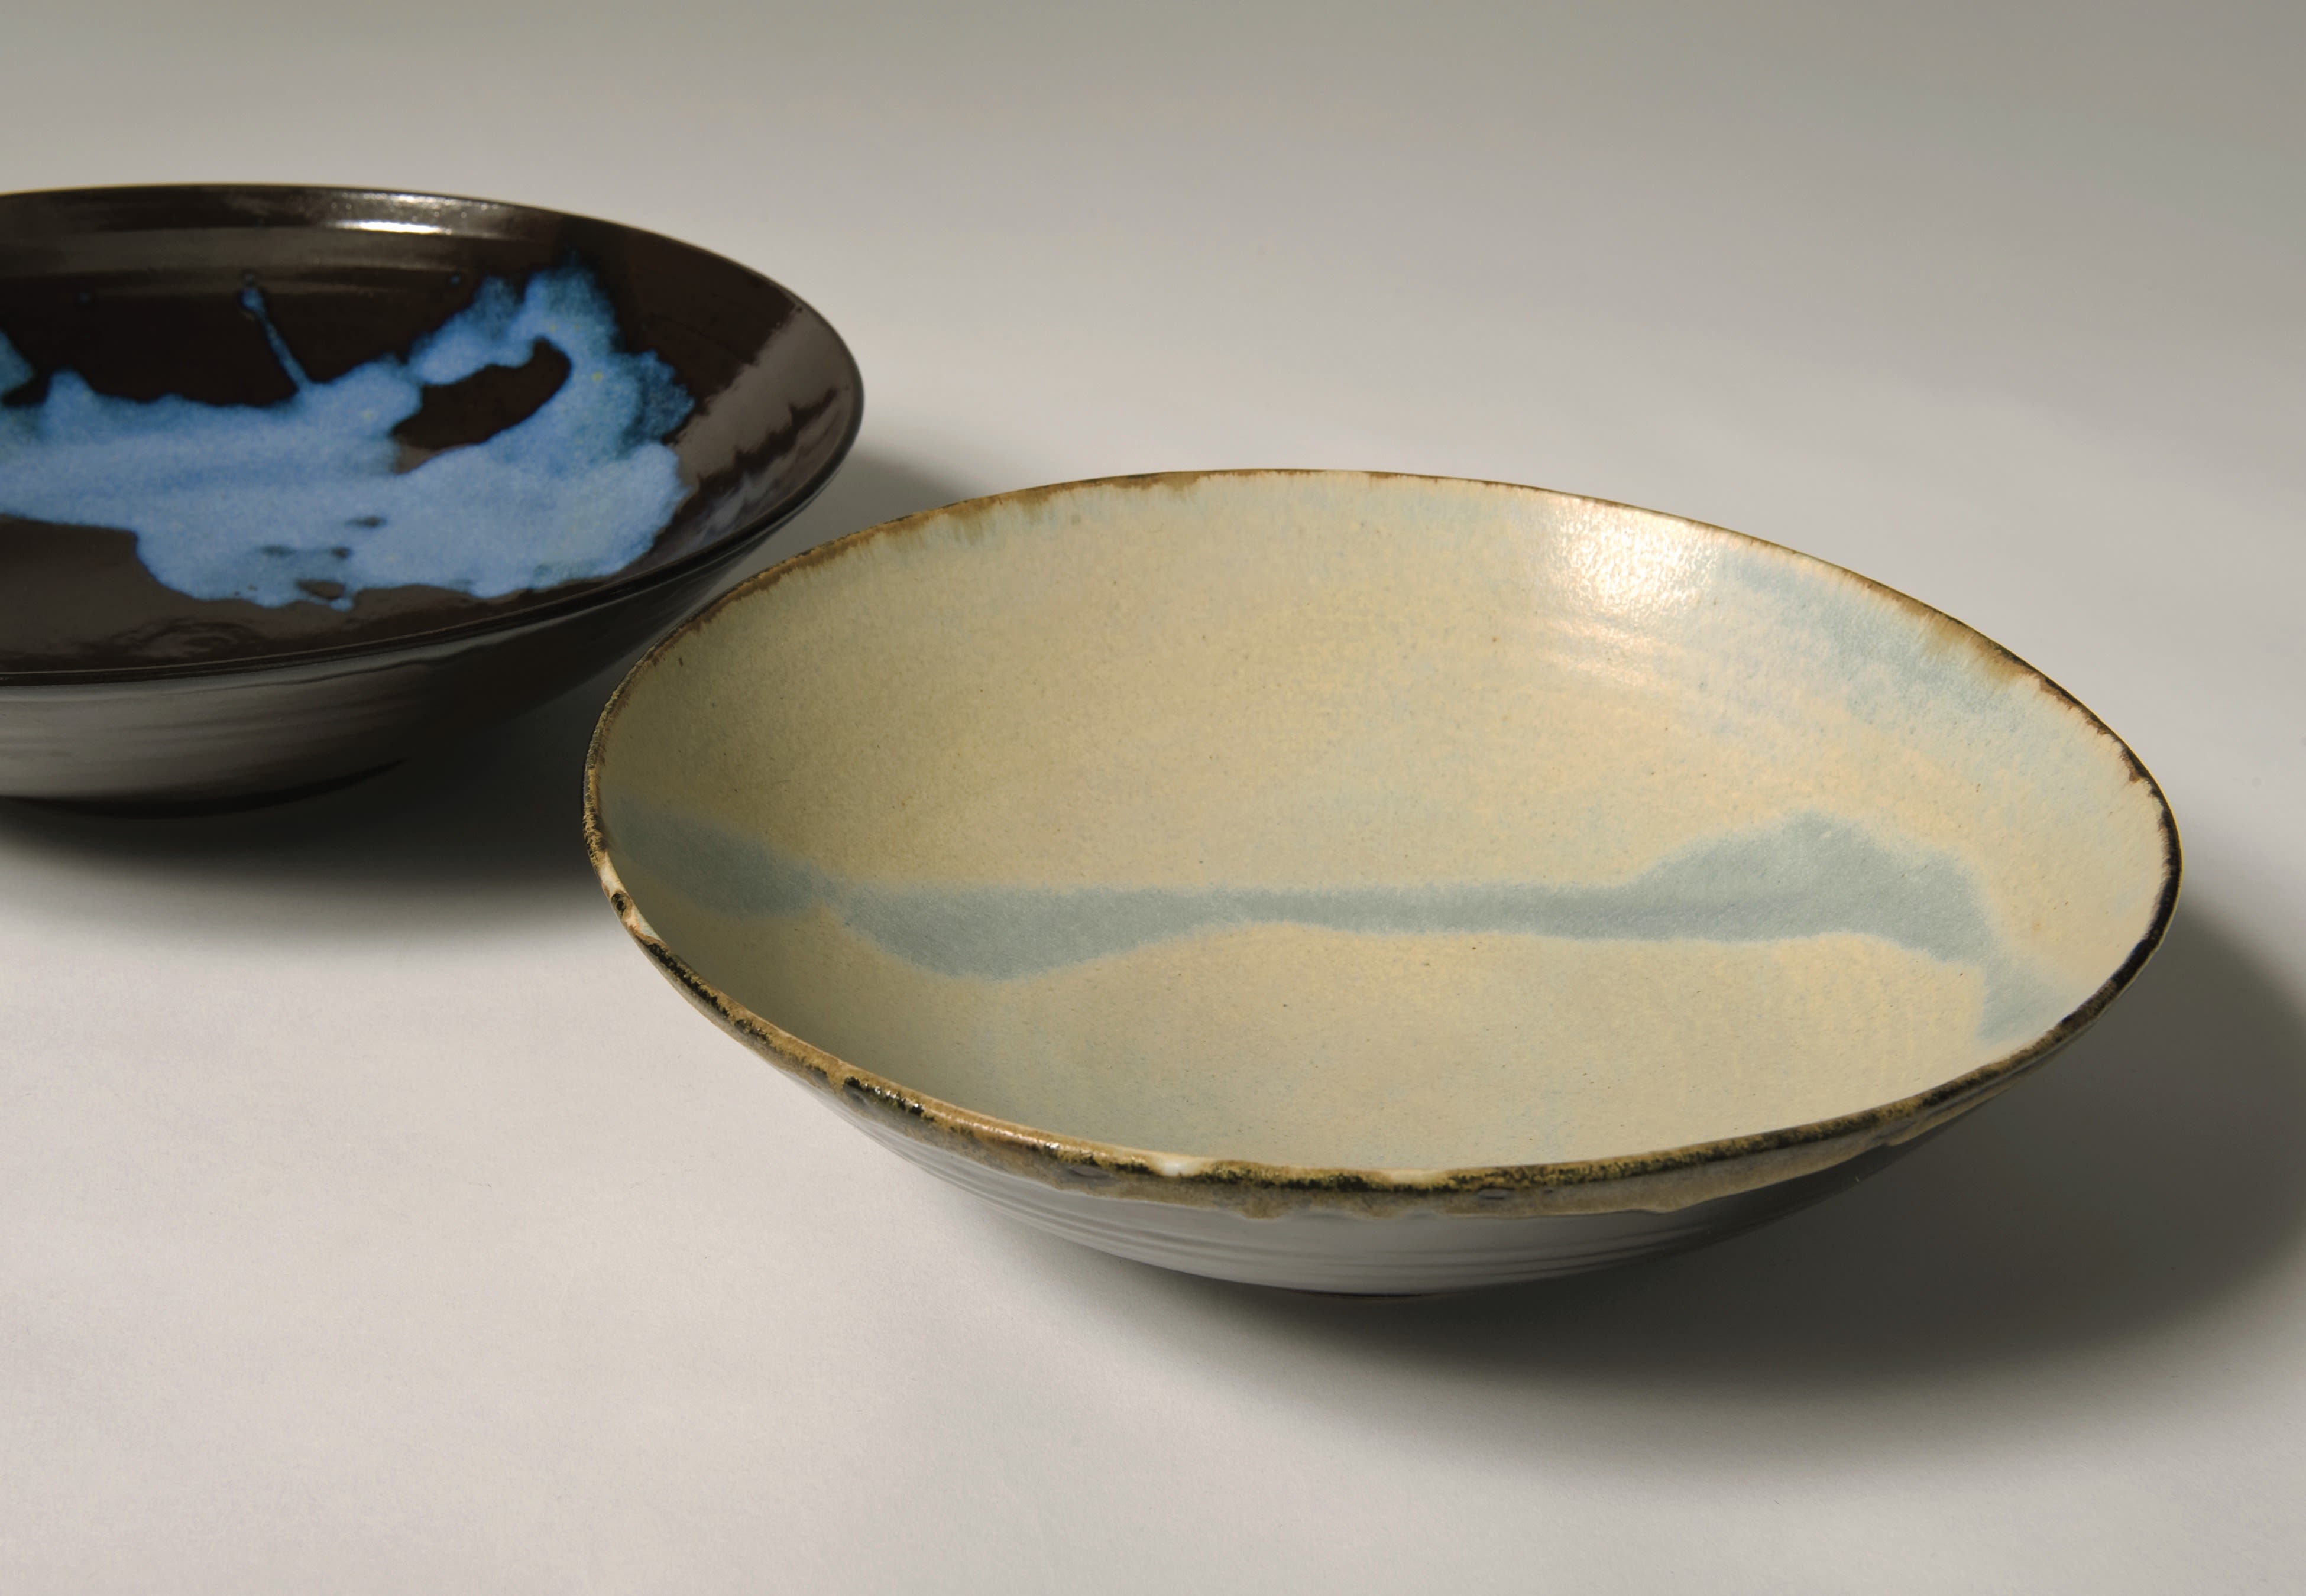 Two plates made by Alex Allpress